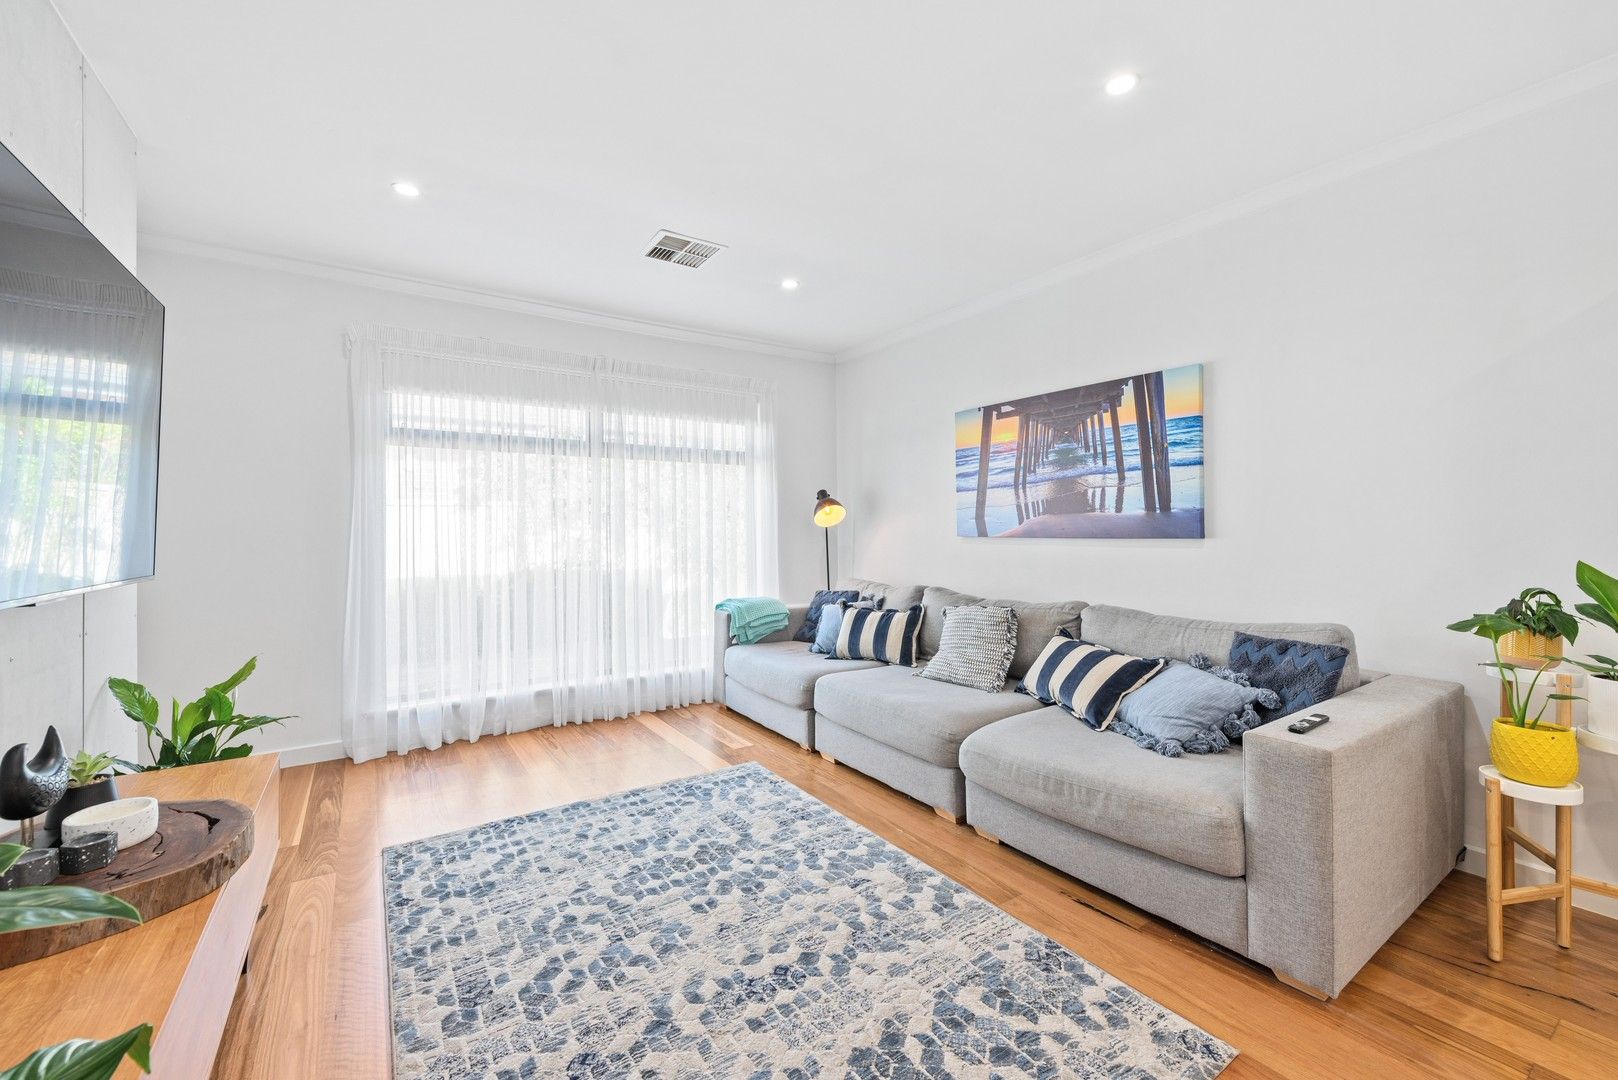 3 bedrooms Apartment / Unit / Flat in 1/1A Keen Avenue GLENELG EAST SA, 5045